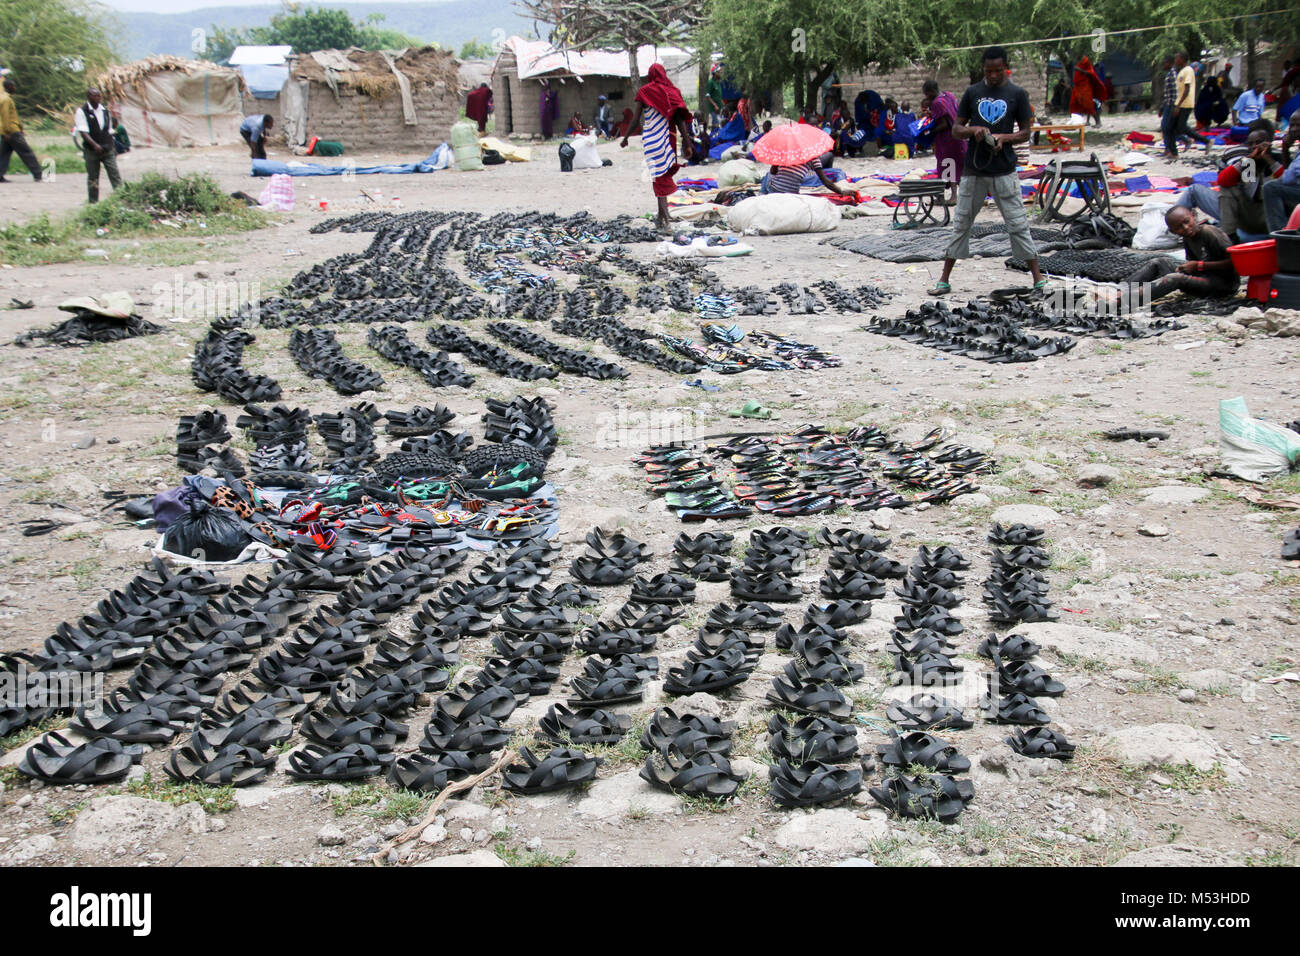 Africa, Tanzania, Frontier Market selling shoes from old tires The goods are placed on a blanket on the ground Stock Photo